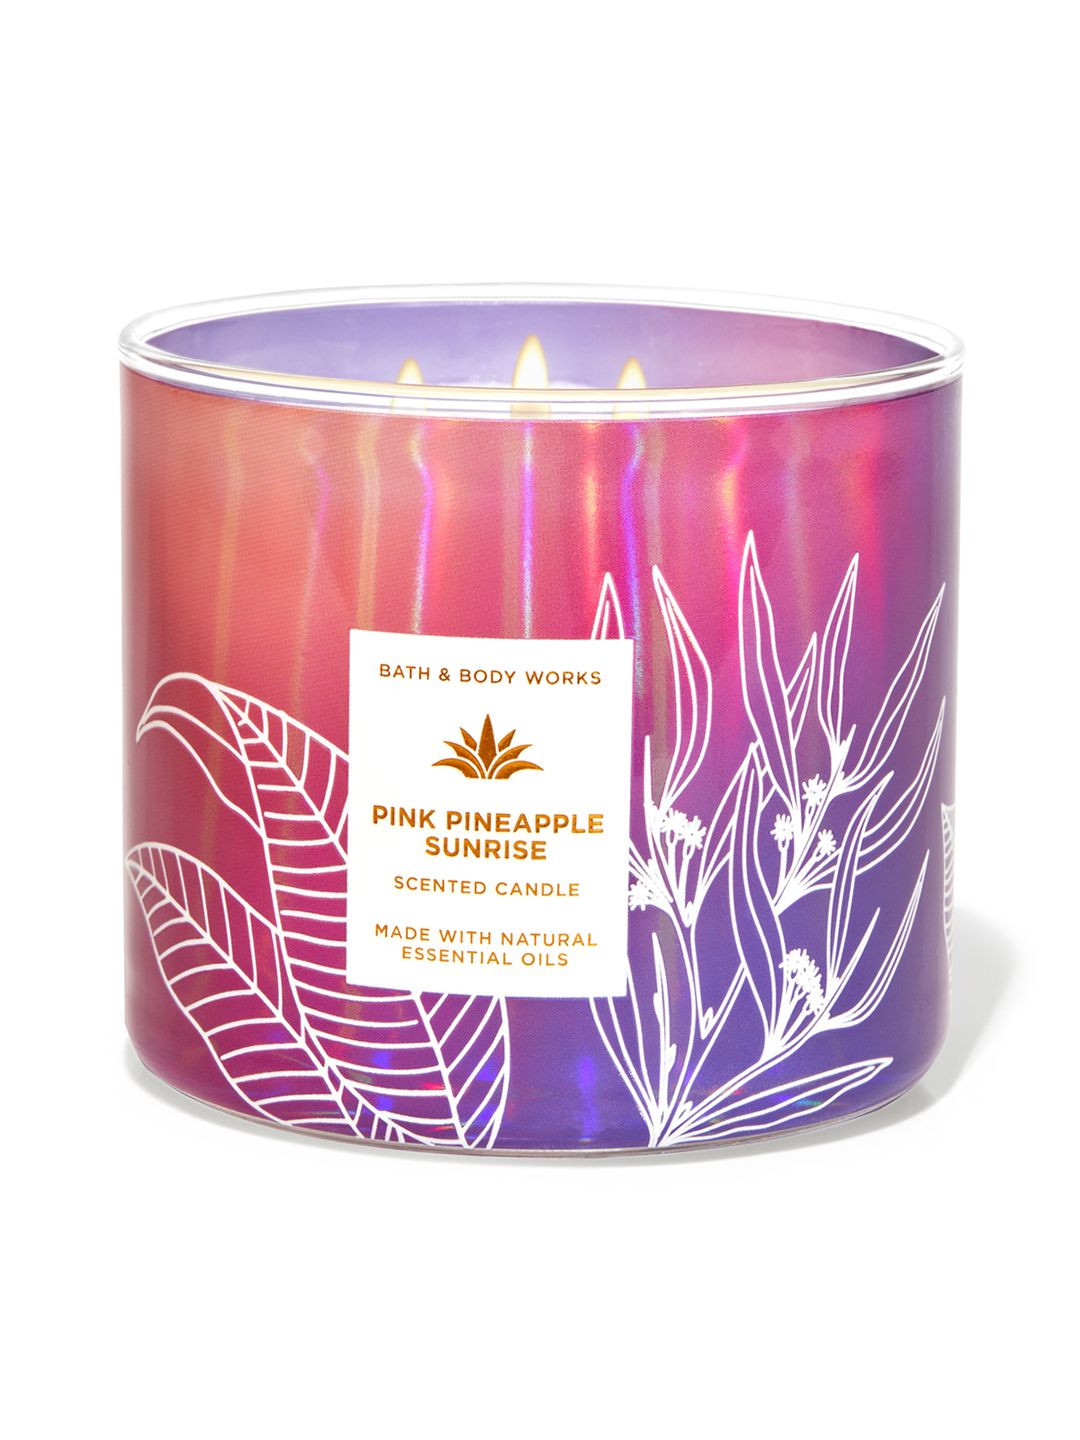 Bath & Body Works Pink Pineapple Sunrise 3-Wick Scented Candle - 411 g Price in India